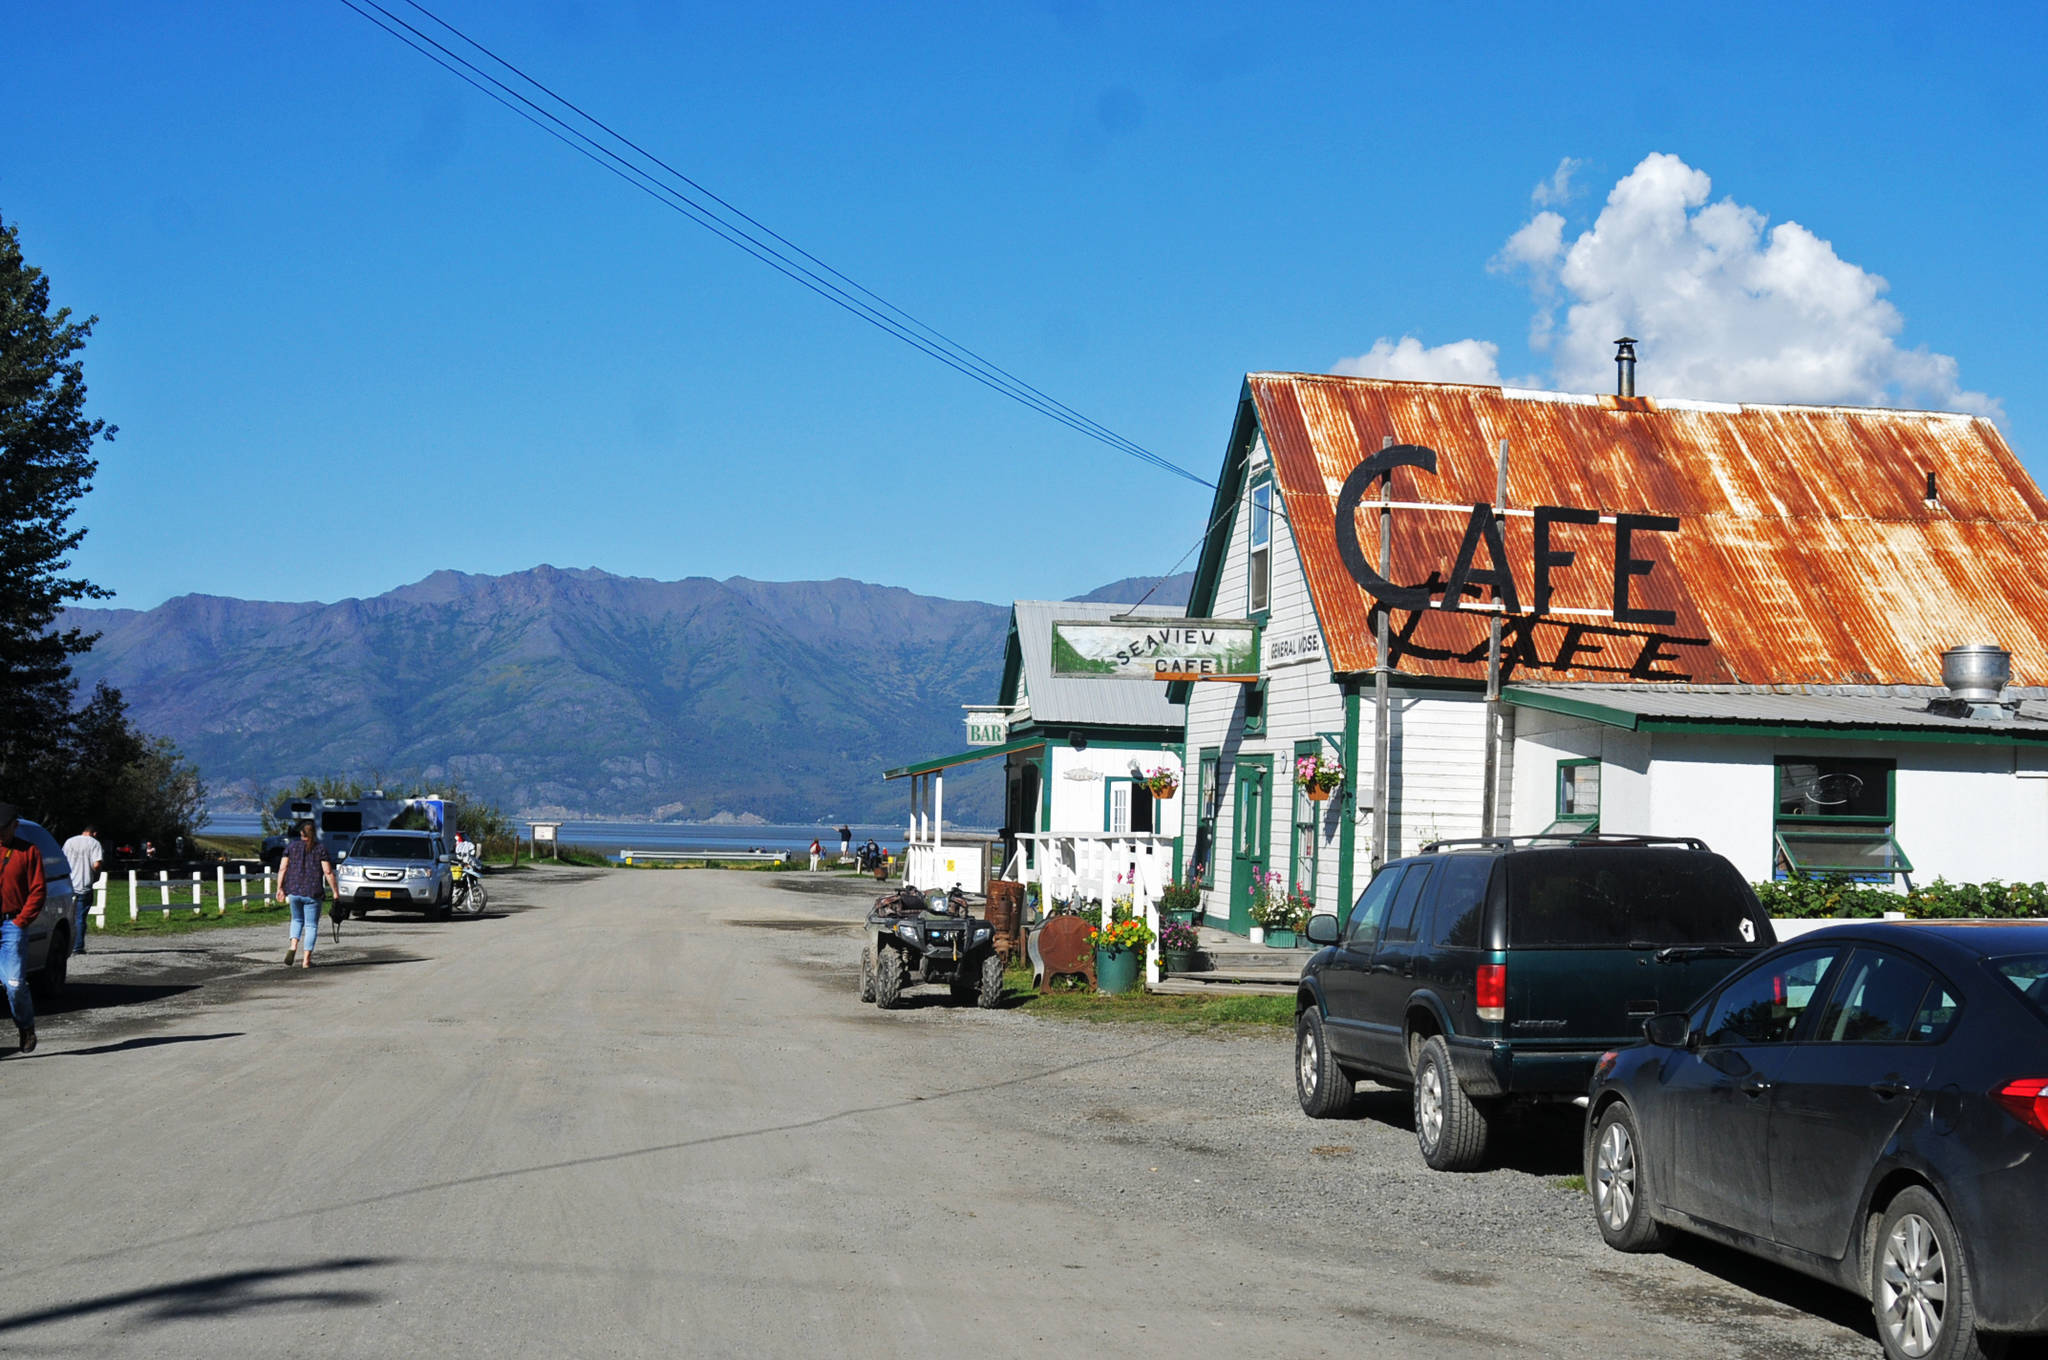 In this August 2016 photo, people walk along the main historic downtown street of Hope, Alaska. Hope, a small unincorporated town along the Turnagain Arm at the end of the 18-mile Hope Highway, is a popular tourist destination in the summer months for its hiking and boating opportunities and for its historical value. (Elizabeth Earl/Peninsula Clarion, file)  In this August 2016 photo, people walk along the main historic downtown street of Hope. Hope, a small unincorporated town along the Turnagain Arm at the end of the 18-mile Hope Highway, is a popular tourist destination in the summer months for its hiking and boating opportunities and for its historical value. (Elizabeth Earl/Peninsula Clarion, file)